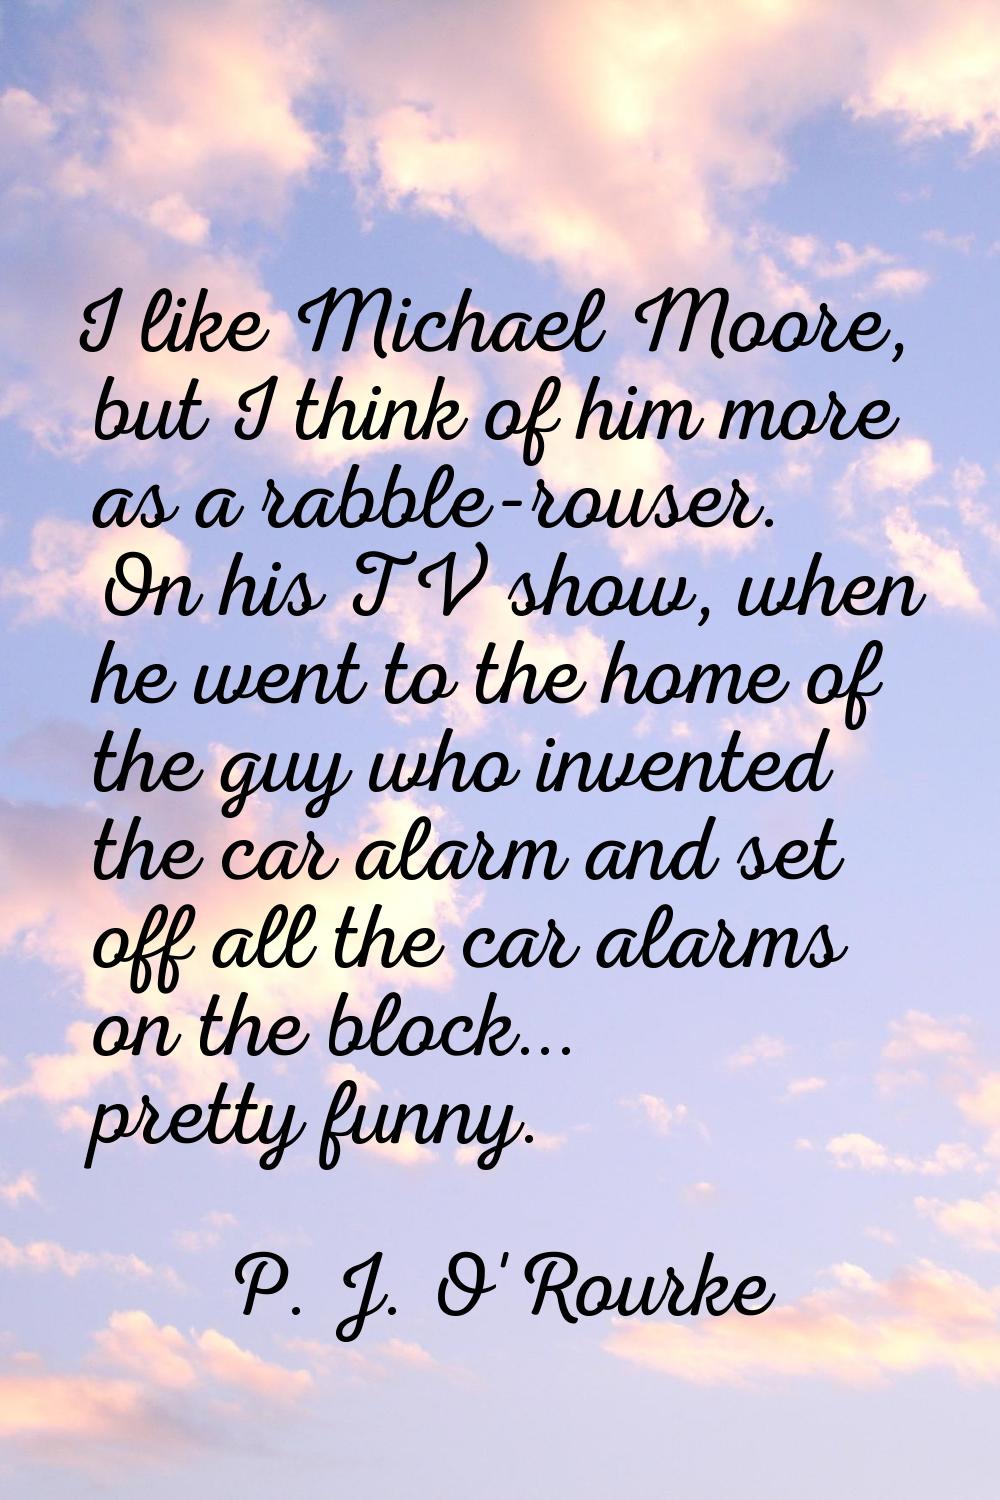 I like Michael Moore, but I think of him more as a rabble-rouser. On his TV show, when he went to t